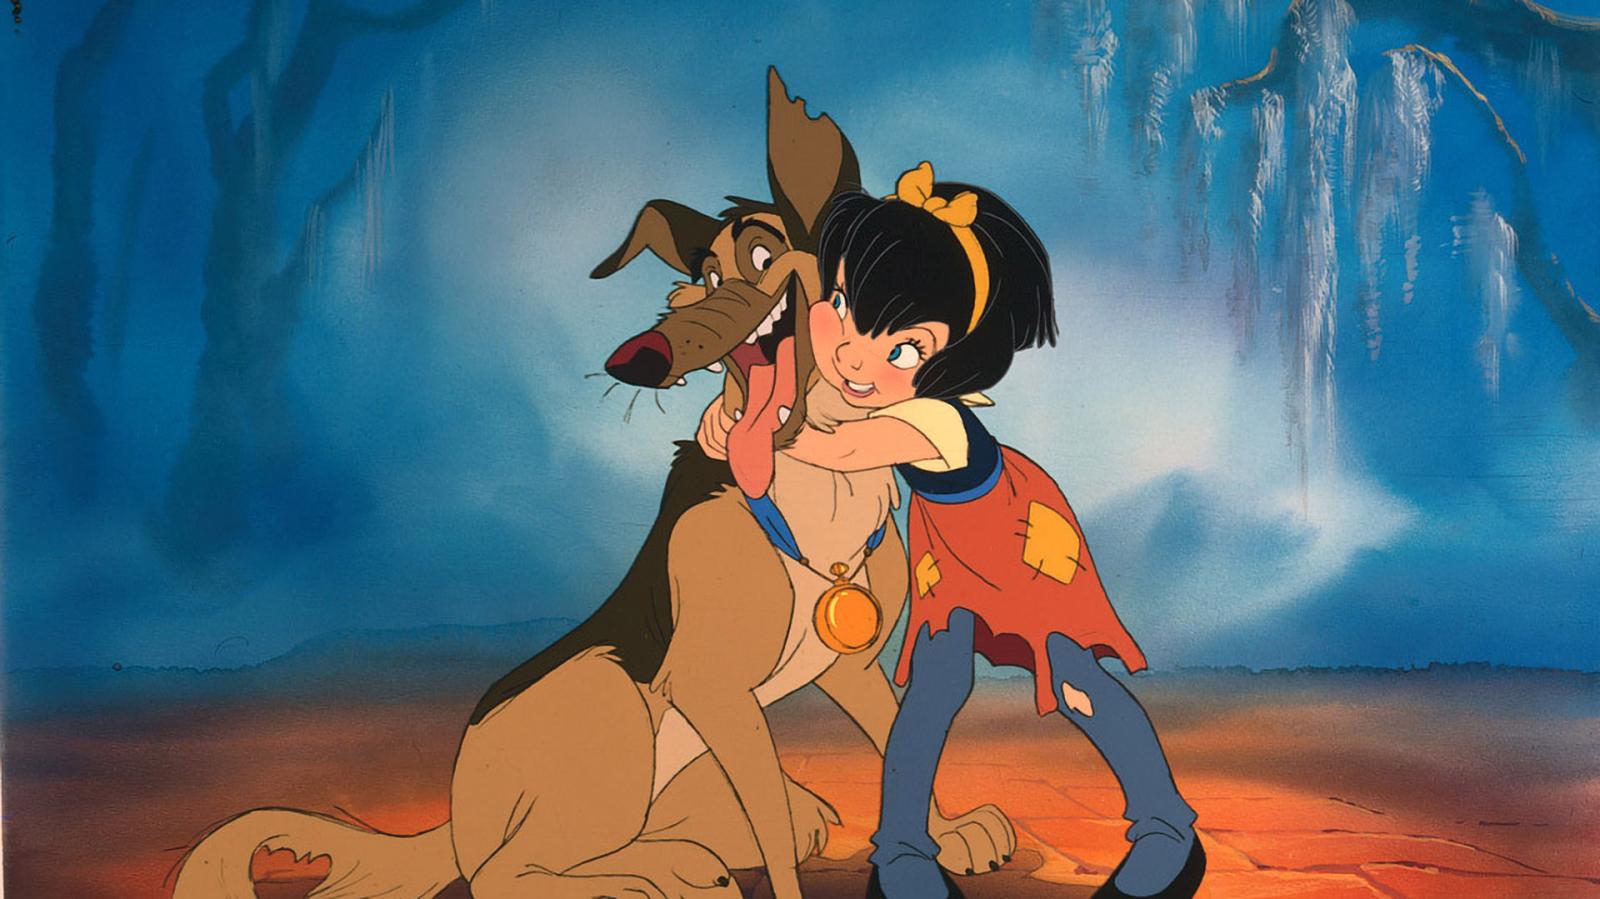 8 Animated Movies with Disney Vibes That Aren't Actually Disney - image 7